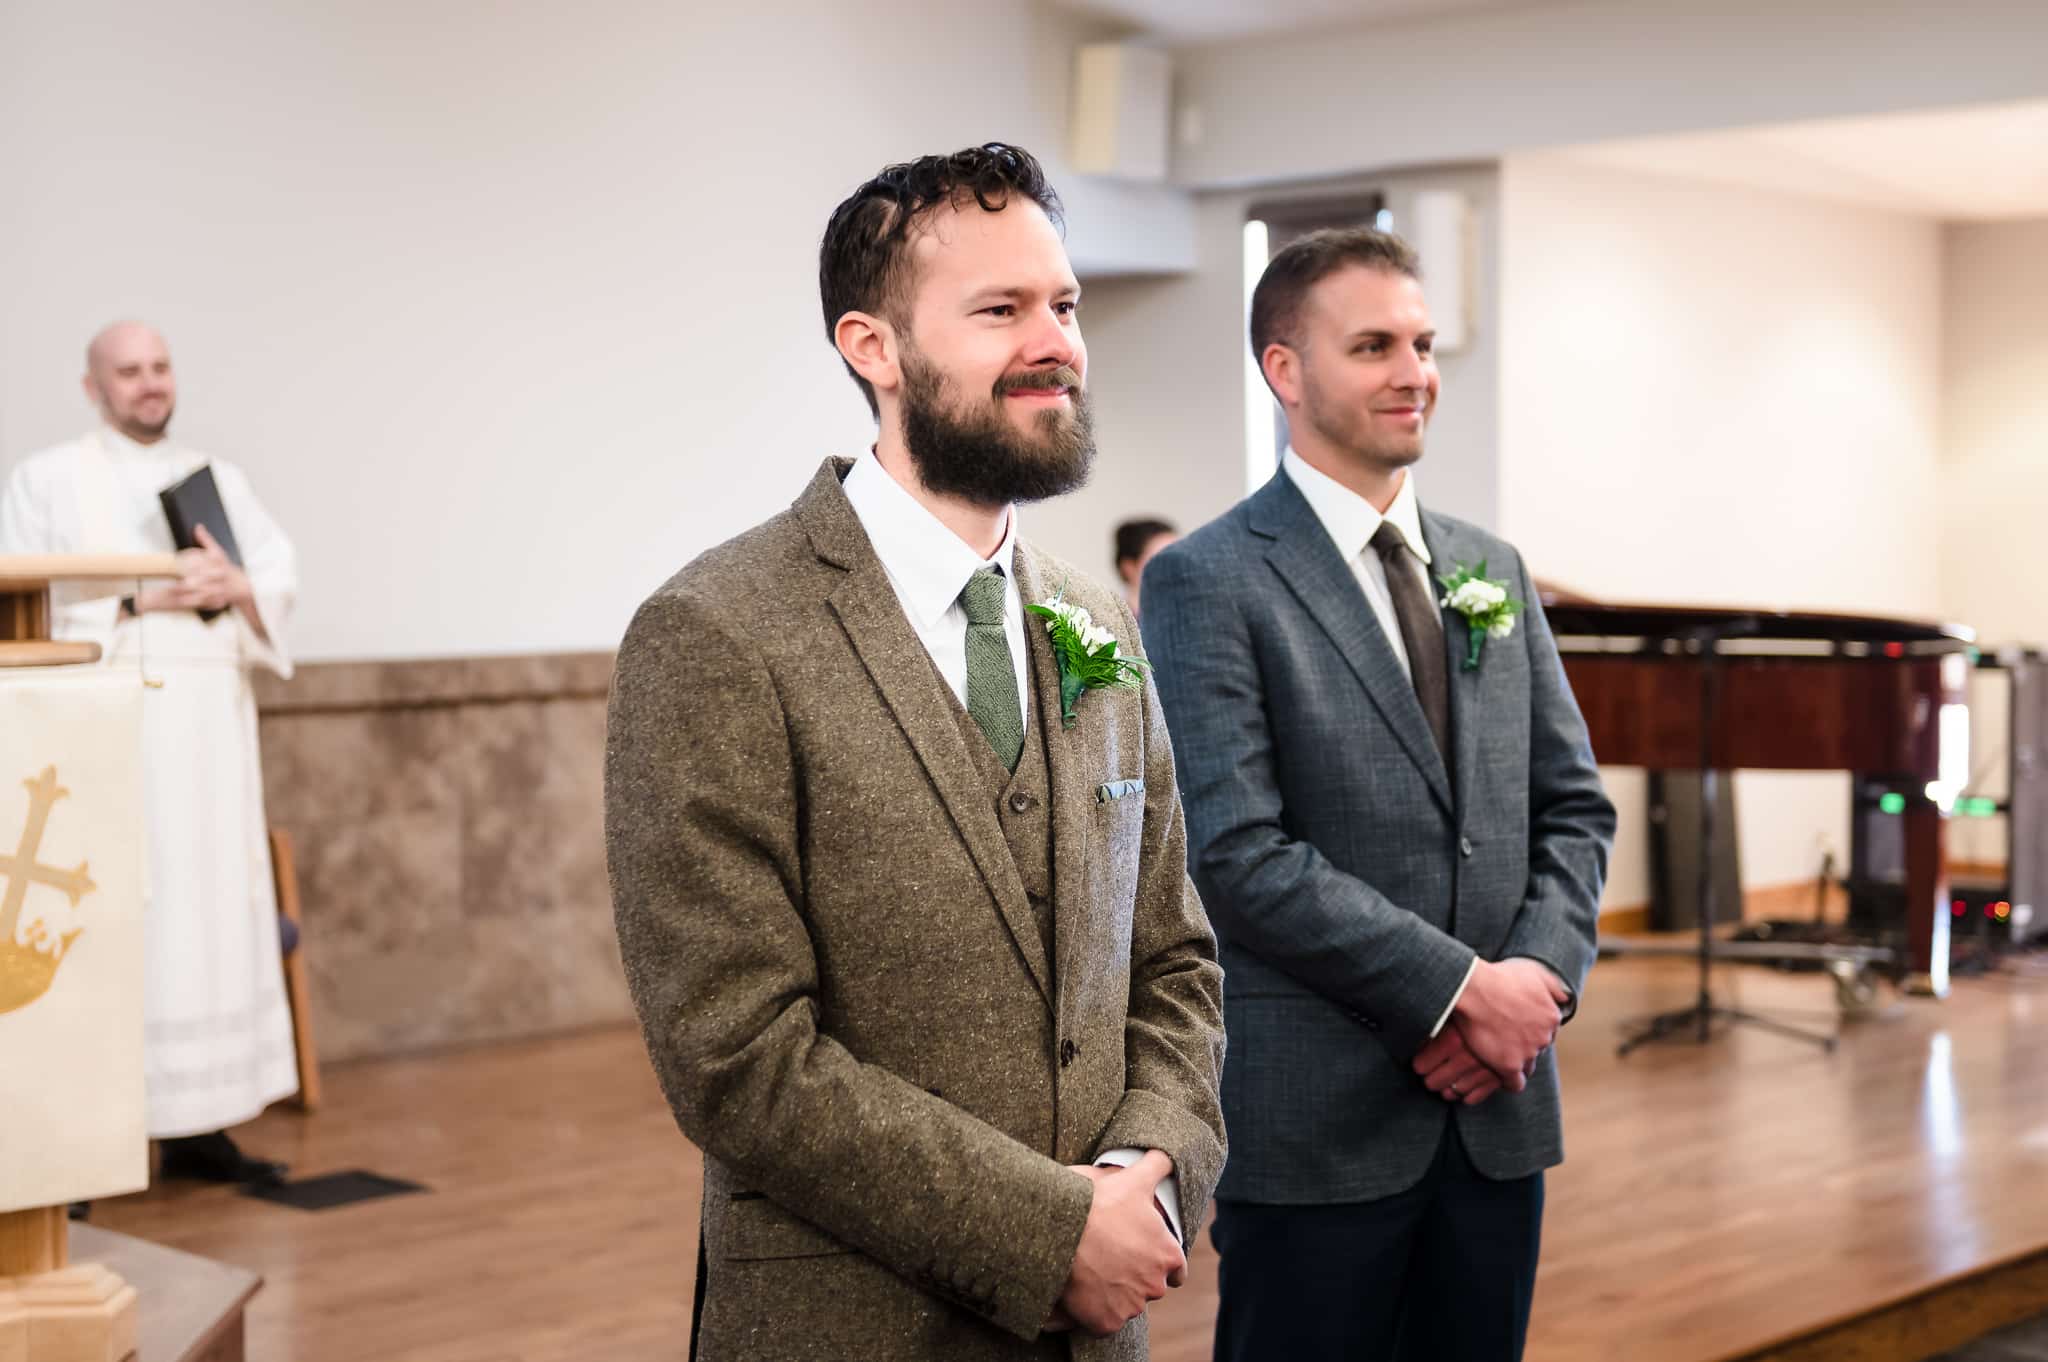 The groom smiles and beams as he sees his bride for the first time.